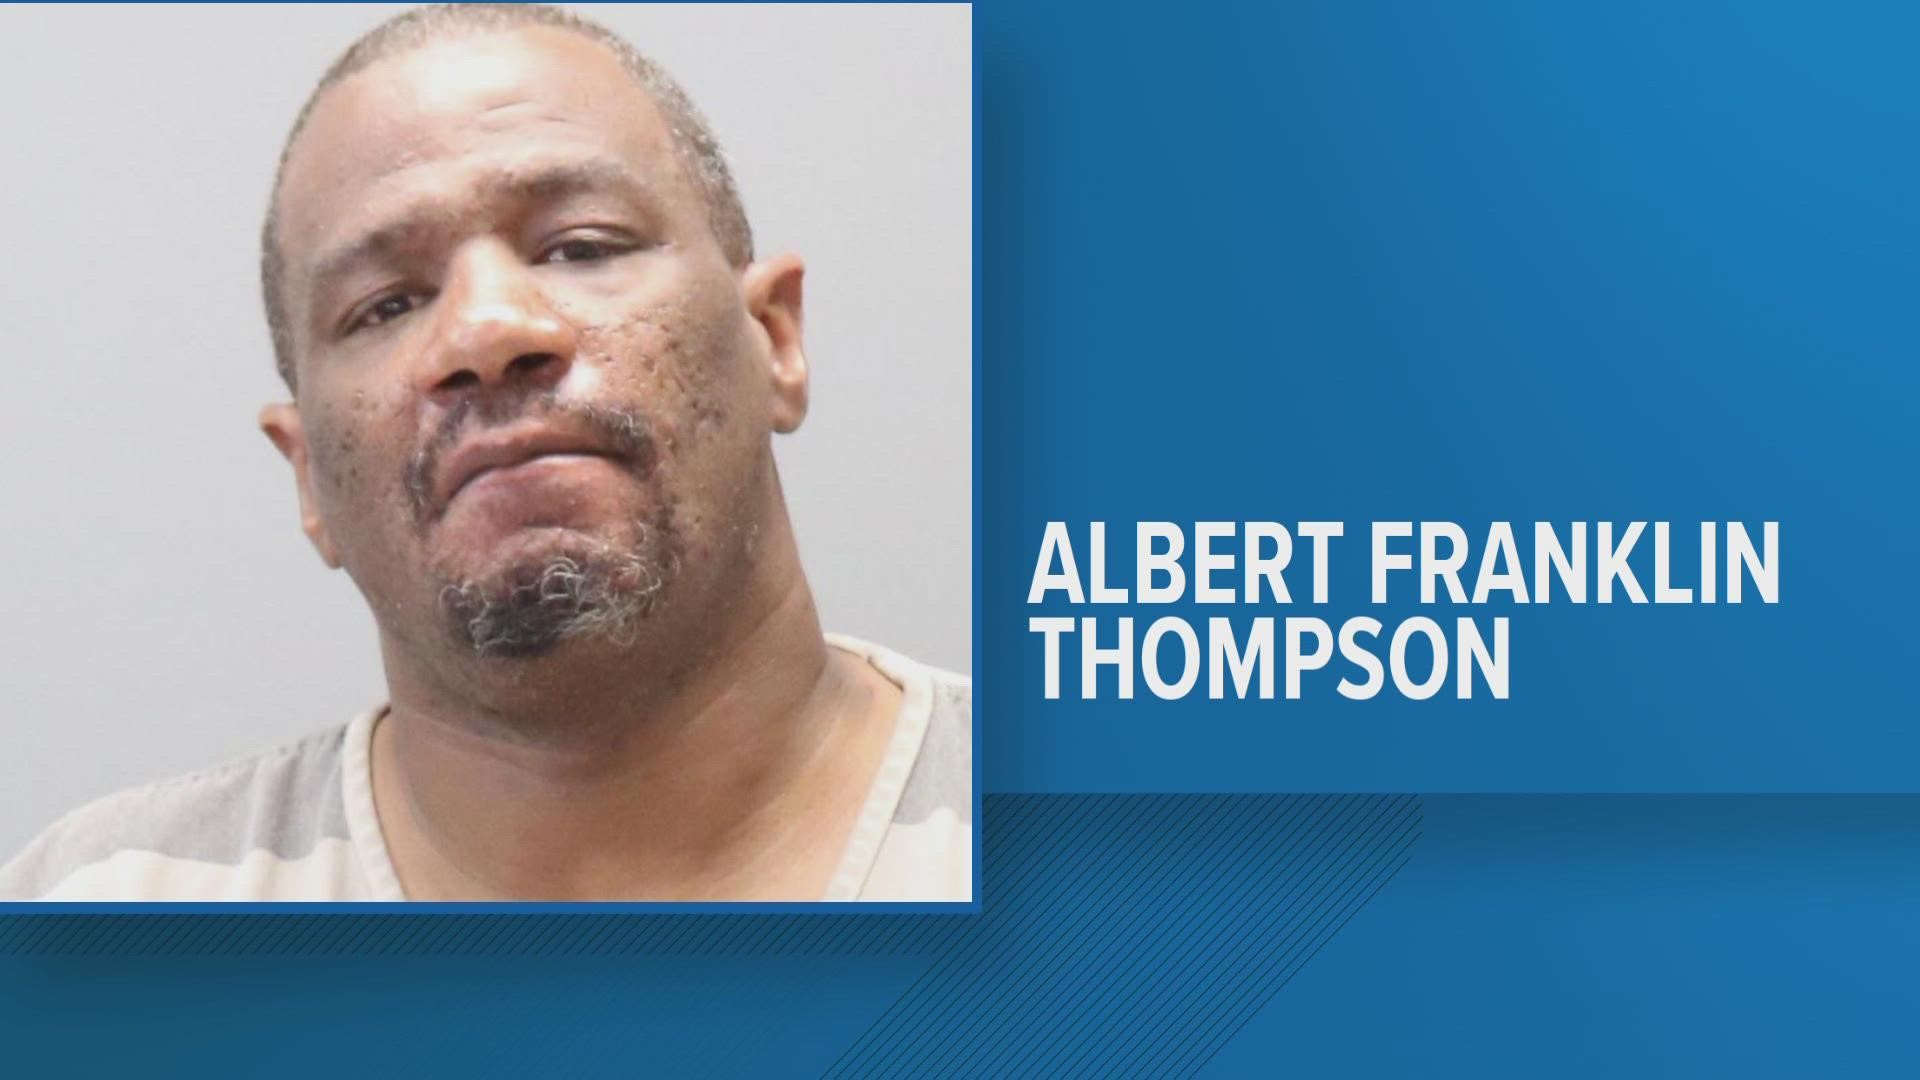 The District Attorney General's office said Albert Franklin Thompkins, Jr., 46, was convicted of two counts of rape of a child and two counts of sexual battery.